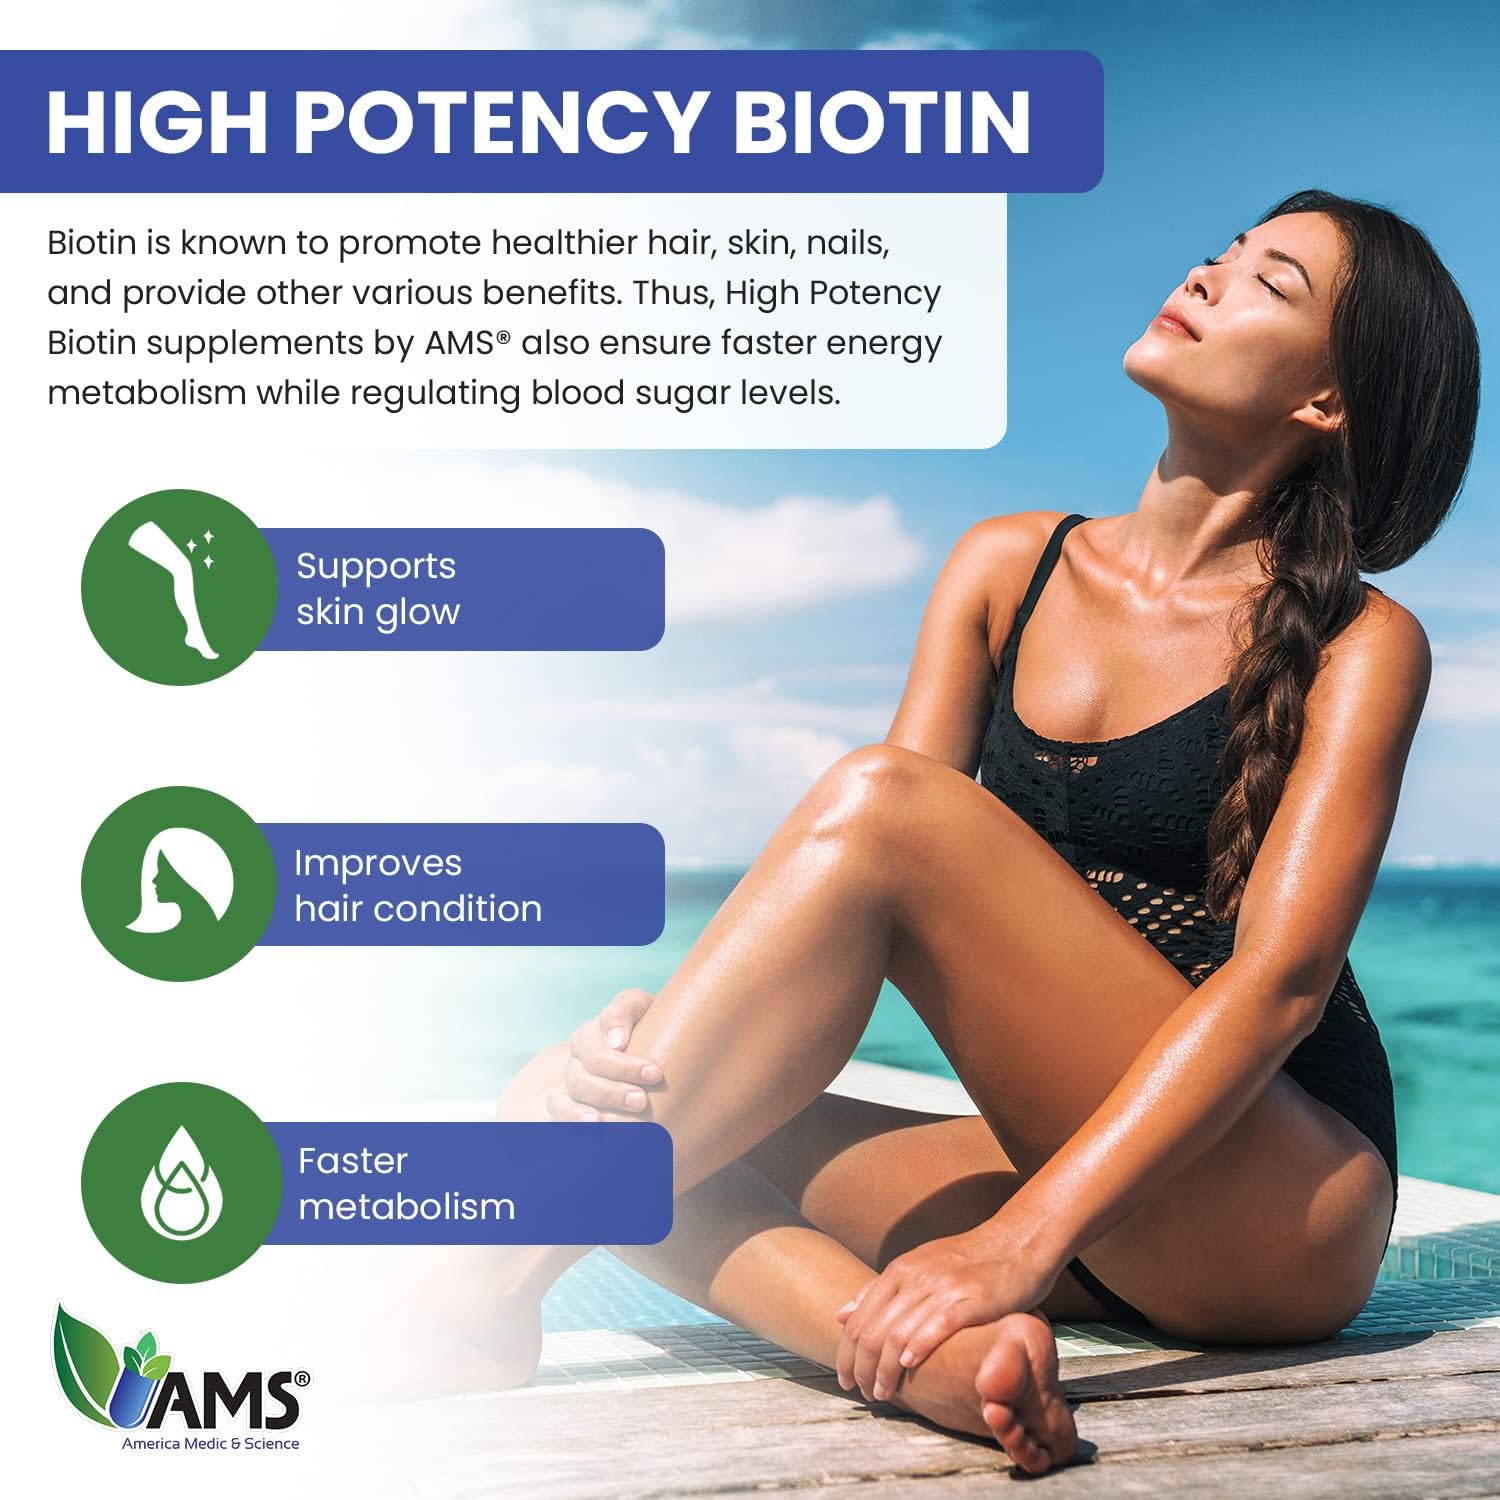 America Medic  Science High Potency Biotin 5,000 mcg | Vitamin B7 Dietary Supplement for Men and Women | Hair Growth Support | for Healthy Skin, Nails, and Metabolism